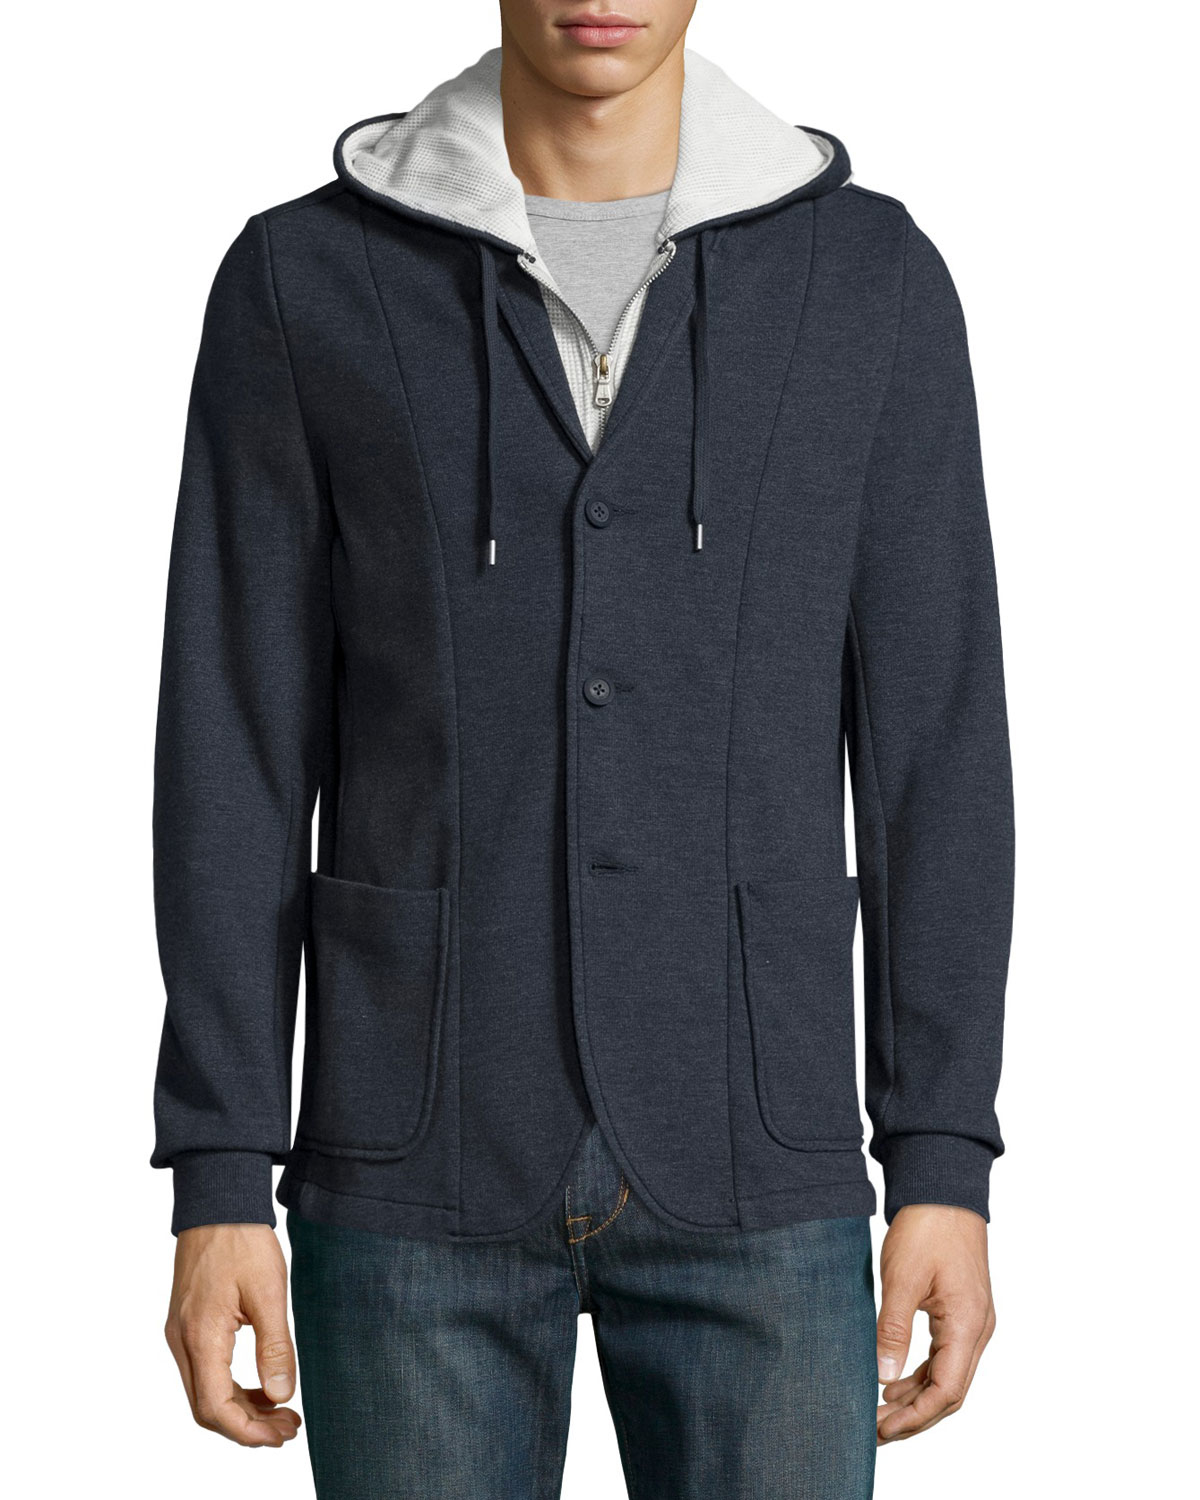 Lacoste Hoodie France, SAVE 56% - icarus.photos